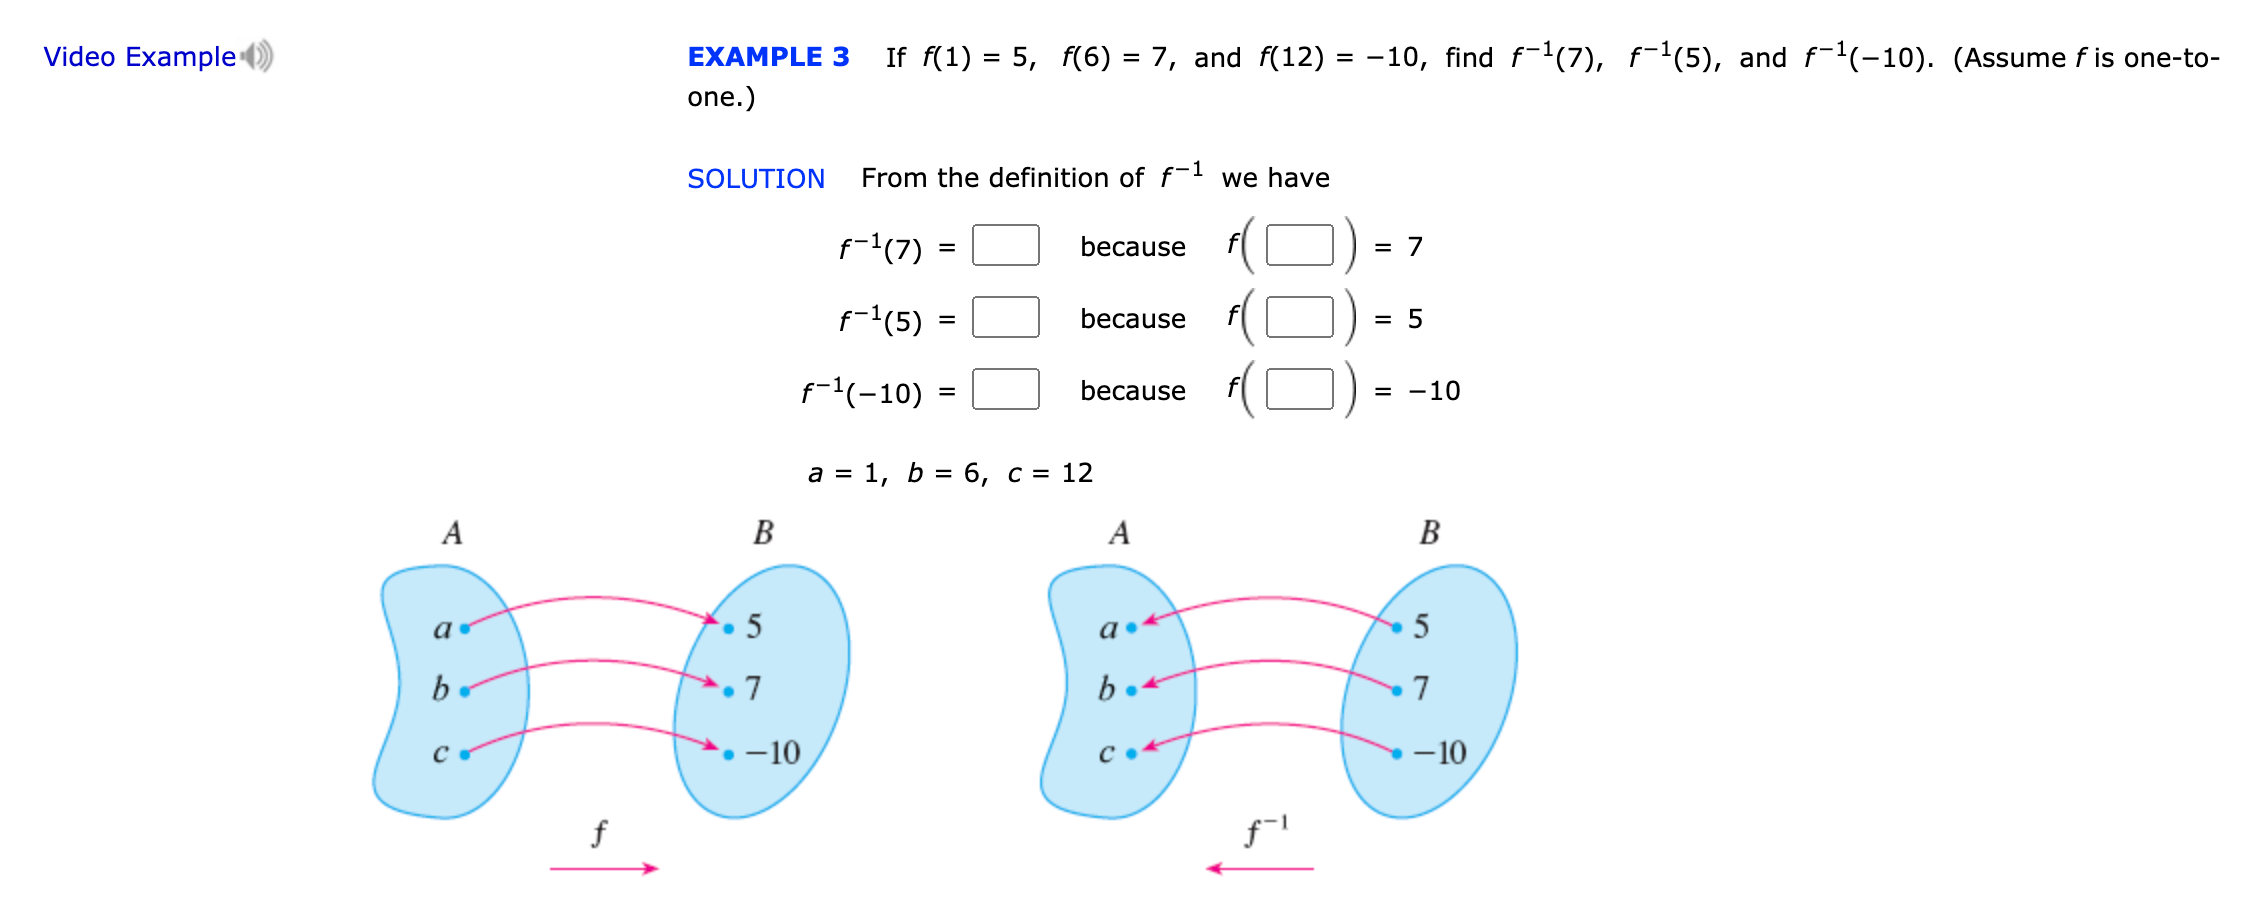 EXAMPLE 3
If f(1) = 5, f(6) = 7, and f(12) = -10, find f-'(7), f-1(5), and f-1(-10). (Assume f is one-to-
%D
%3D
one.)
SOLUTION
From the definition of f1 we have
f-1(7)
because
= 7
%D
f-'(5)
because
= 5
f-(-10) =
because
= -10
а %3D 1, b %3D 6, с %3D 12
A
A
B
a
5
5
be
7
b.t
• -10
- 10
f
B.
